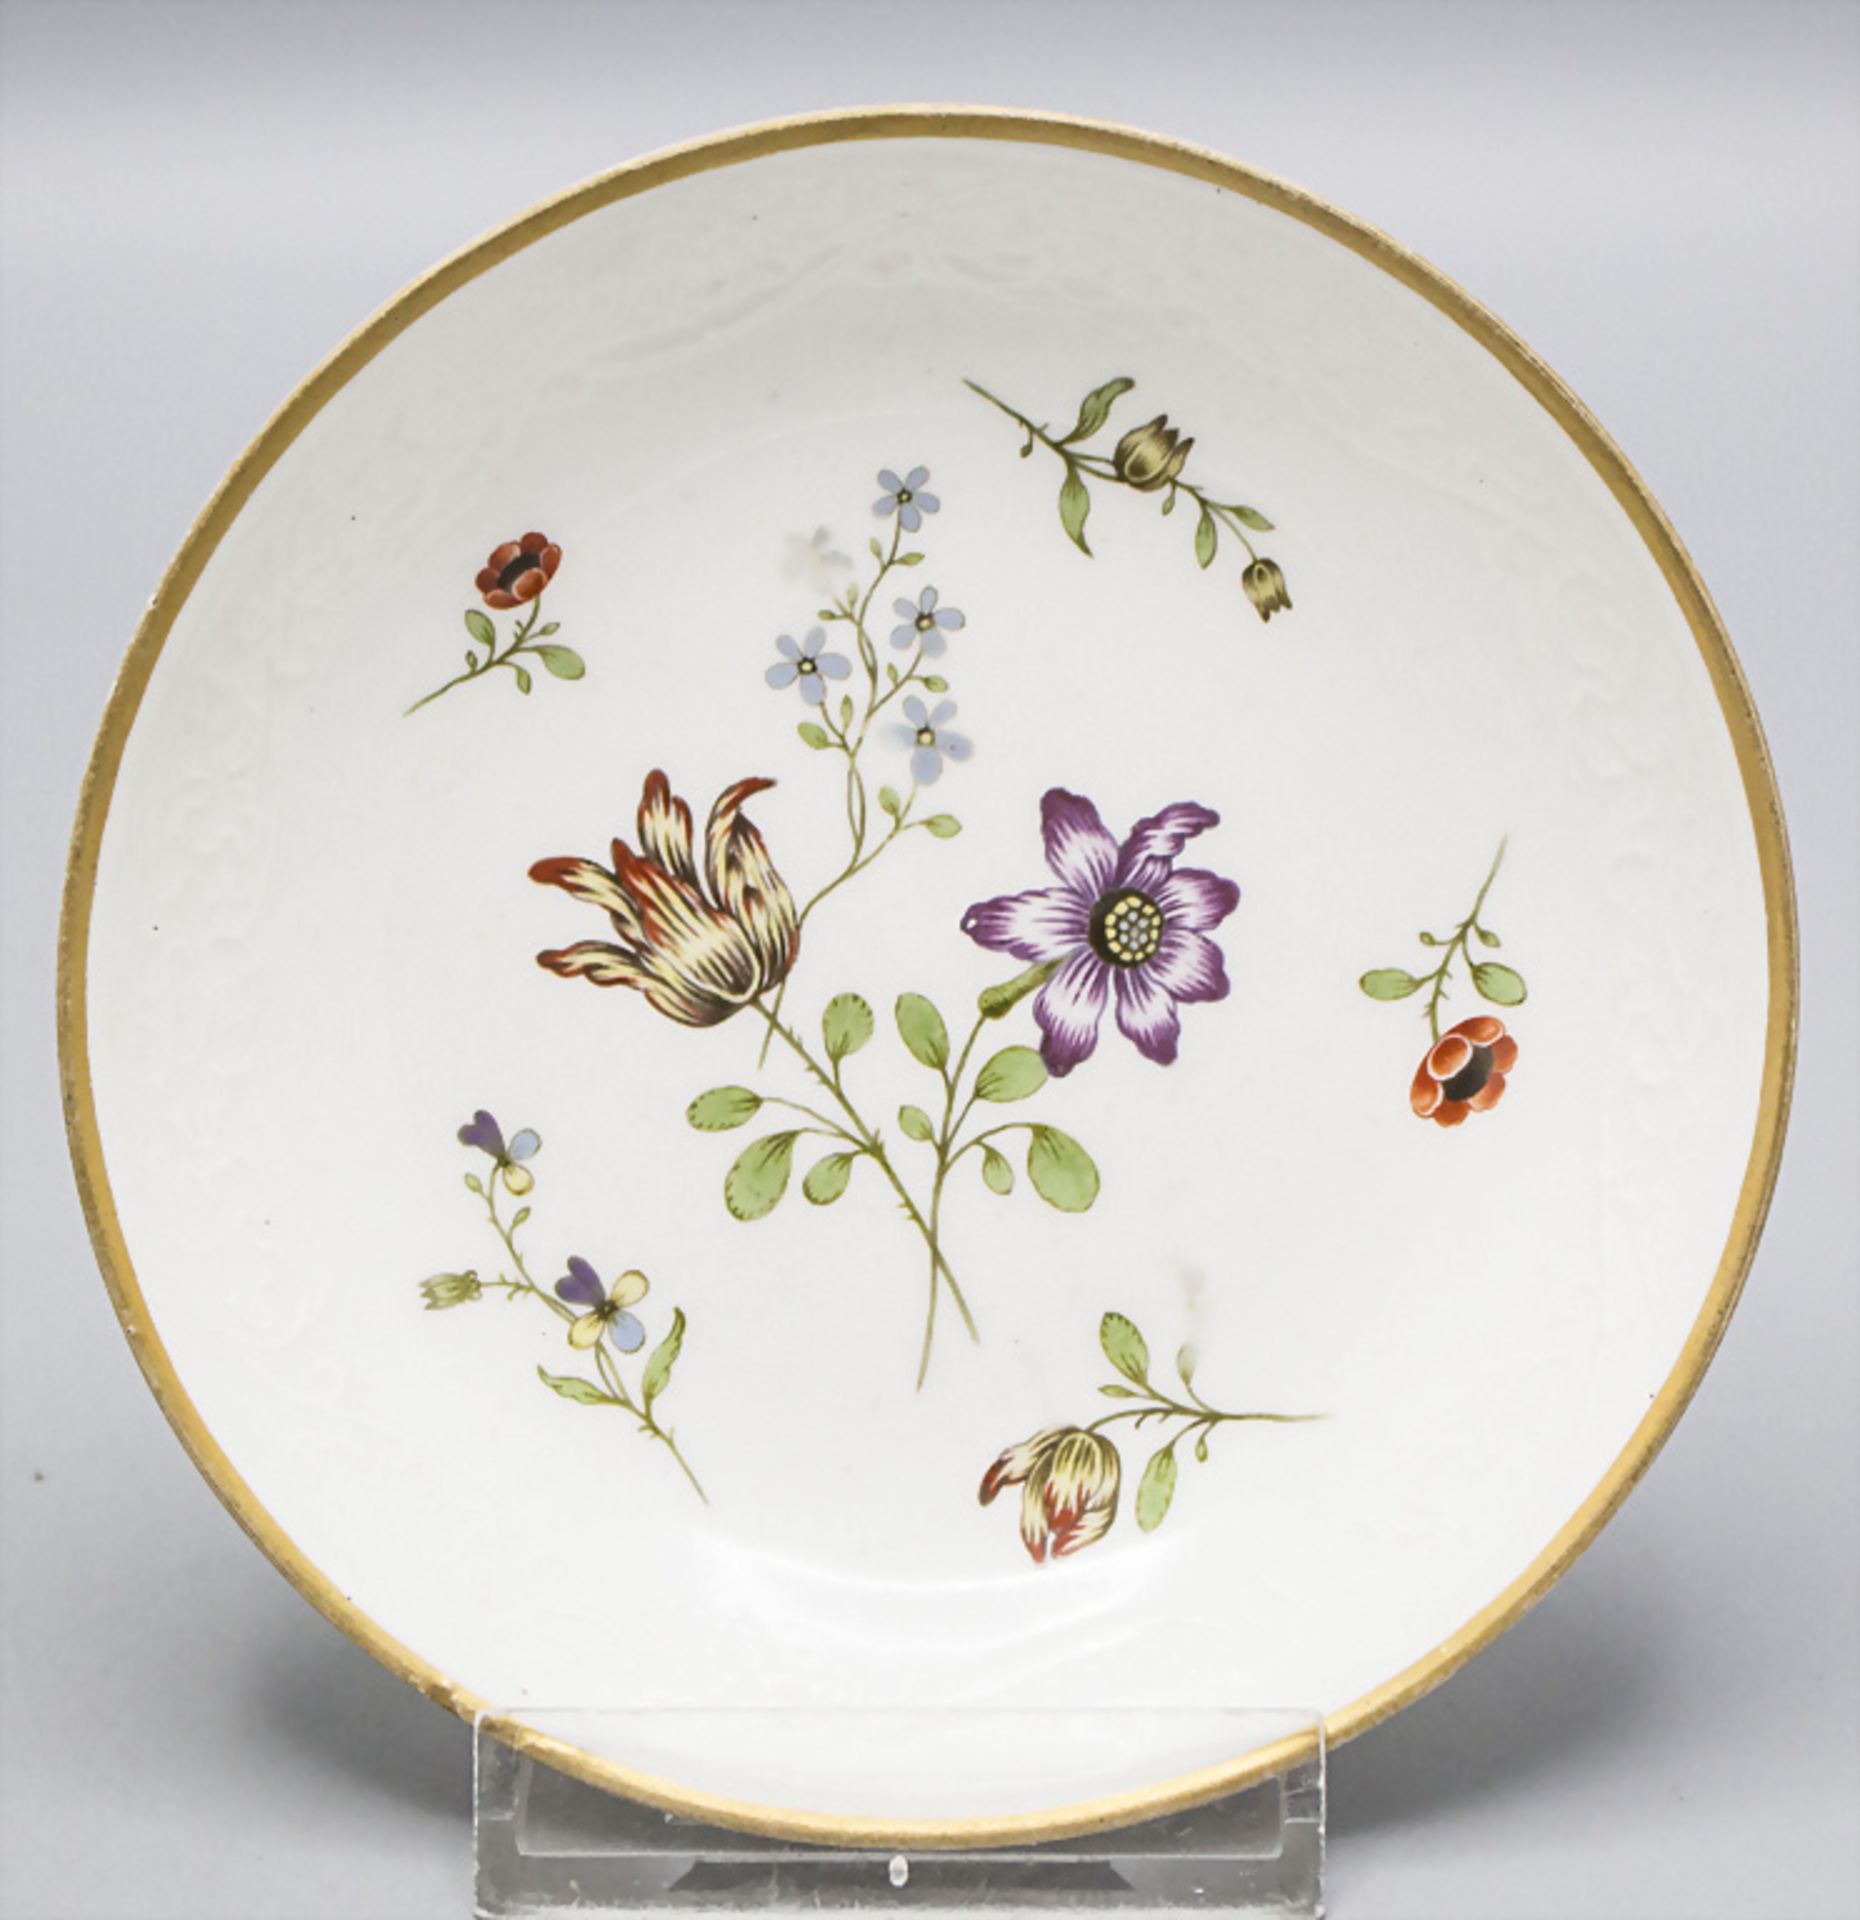 Tasse und Untertasse mit seltener Blumenmalerei / A cup and saucer with rare flower paintings, ... - Image 4 of 5